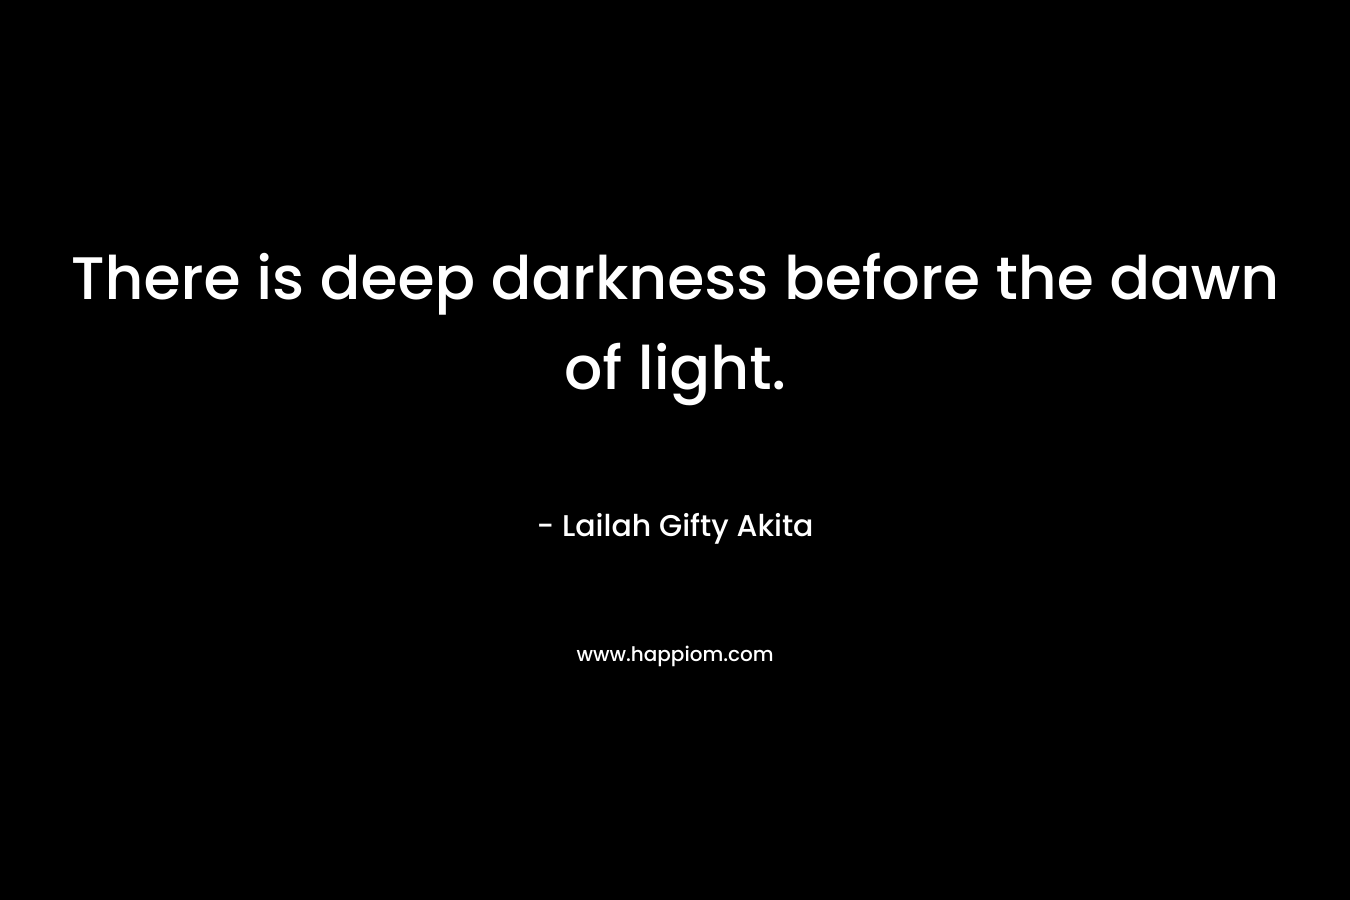 There is deep darkness before the dawn of light.